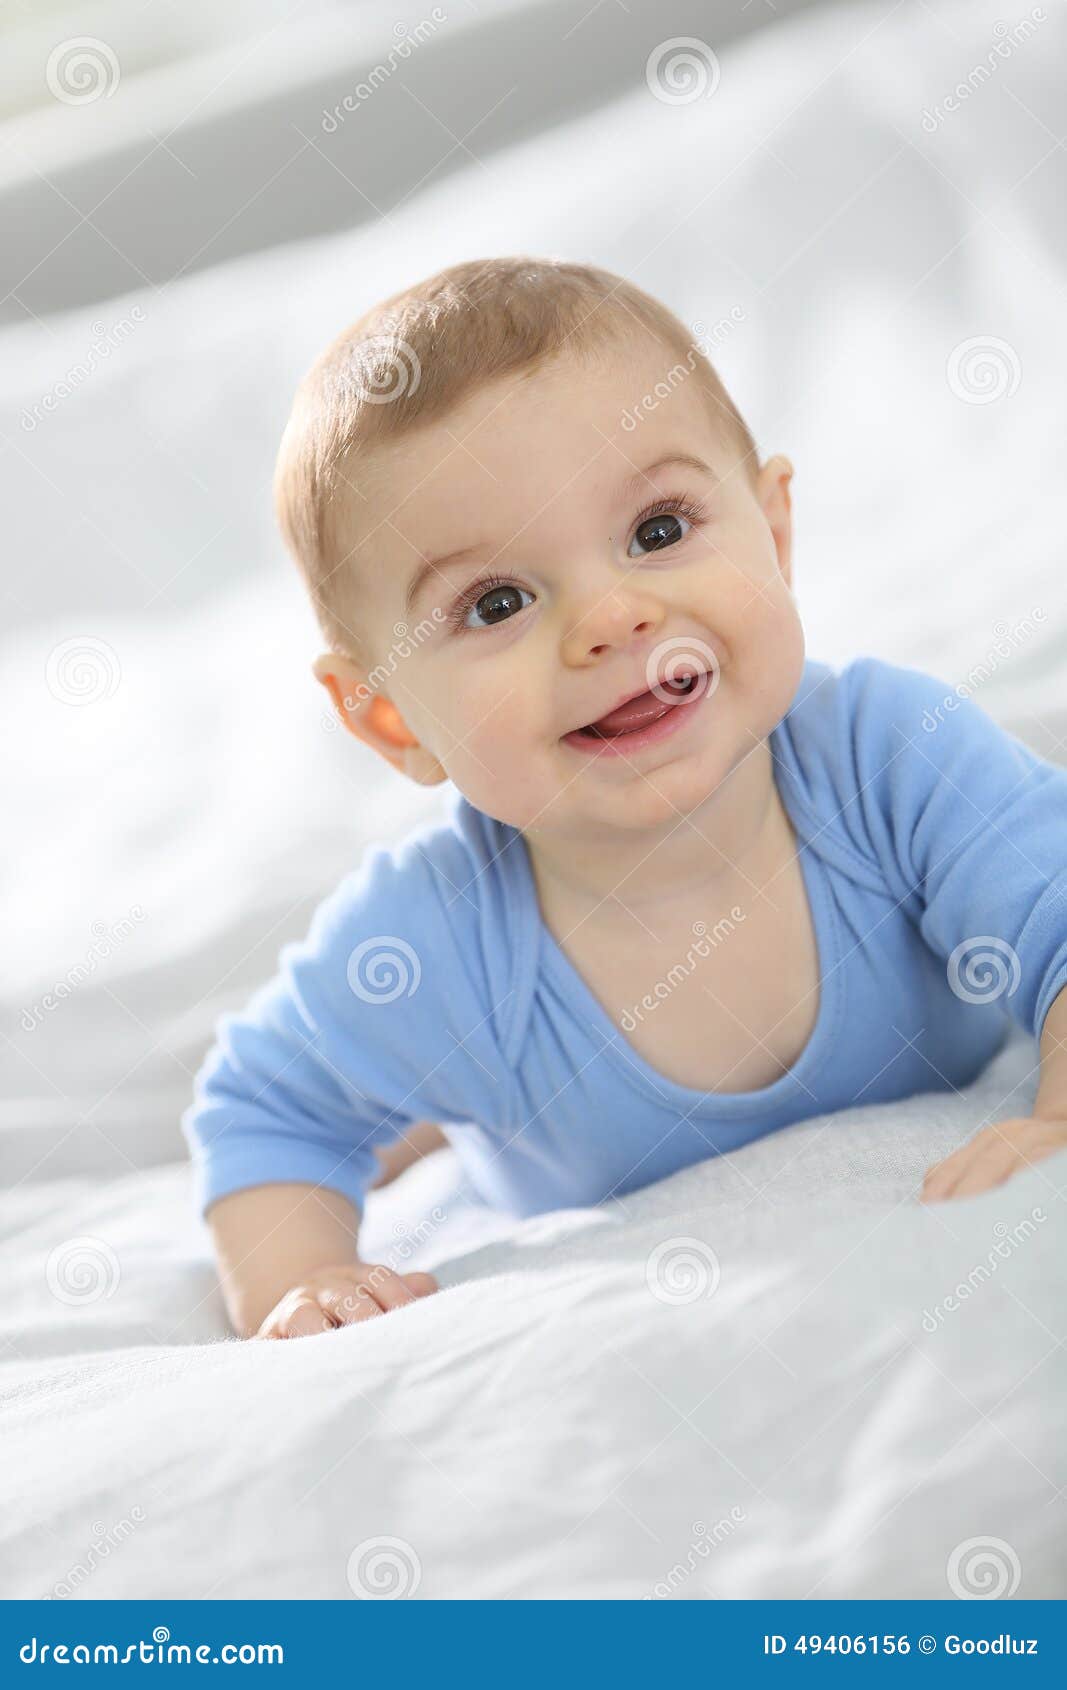 Cute Little Baby Smiling and Lying on the Bed Stock Photo - Image ...